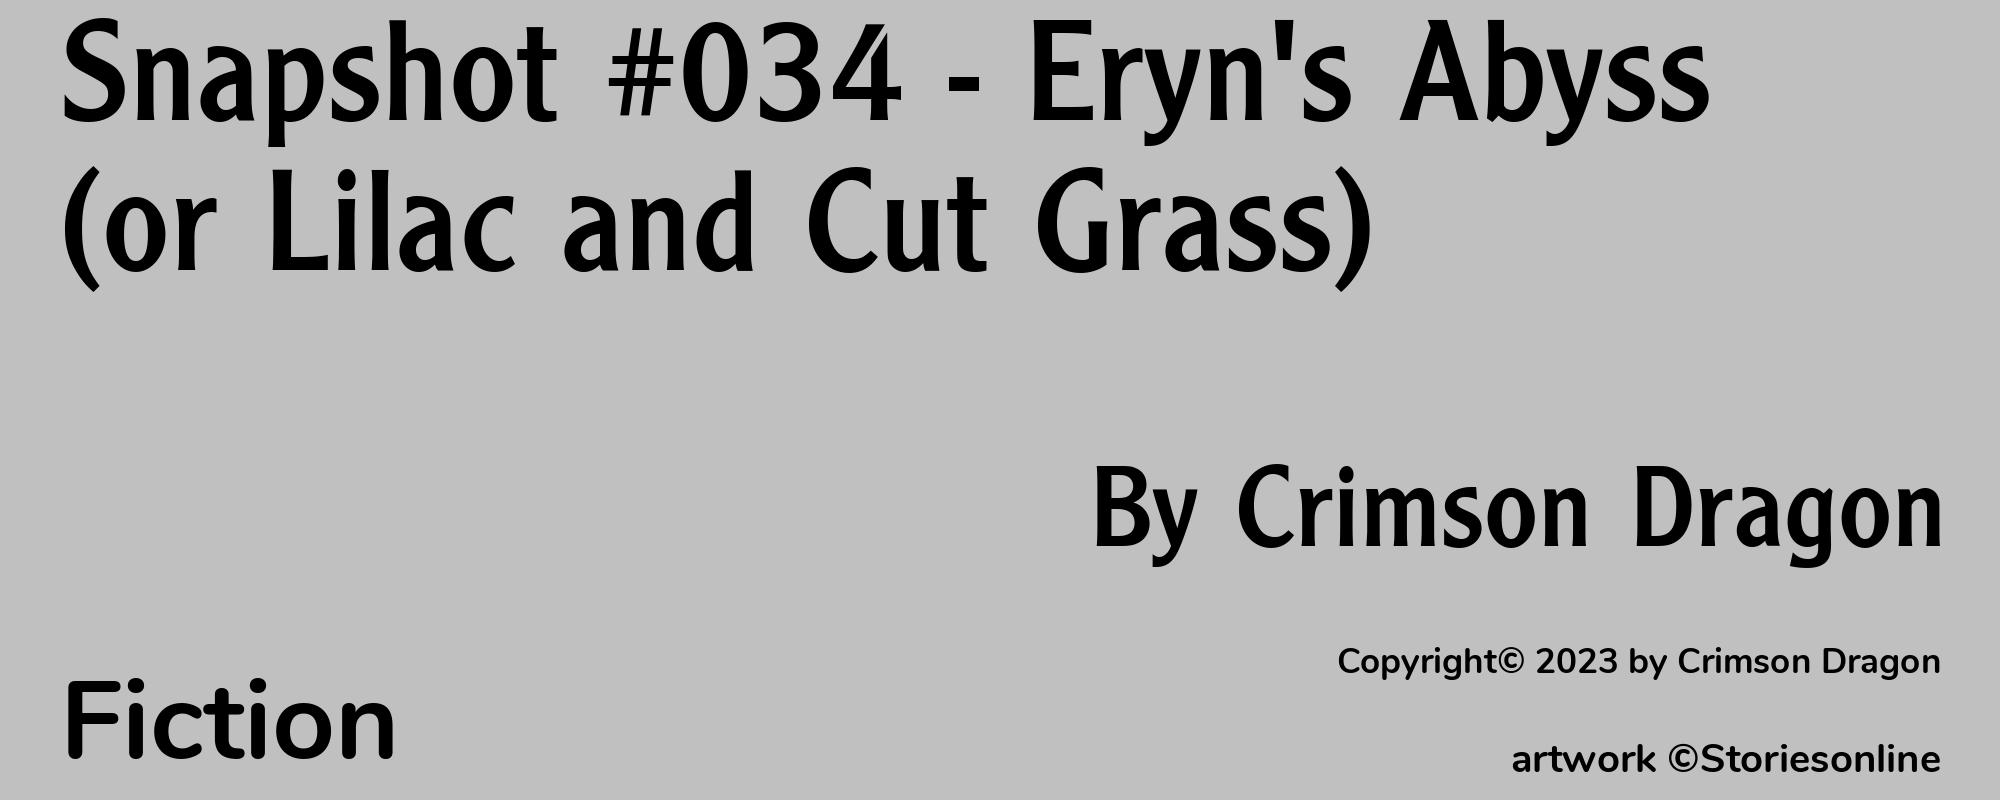 Snapshot #034 - Eryn's Abyss (or Lilac and Cut Grass) - Cover